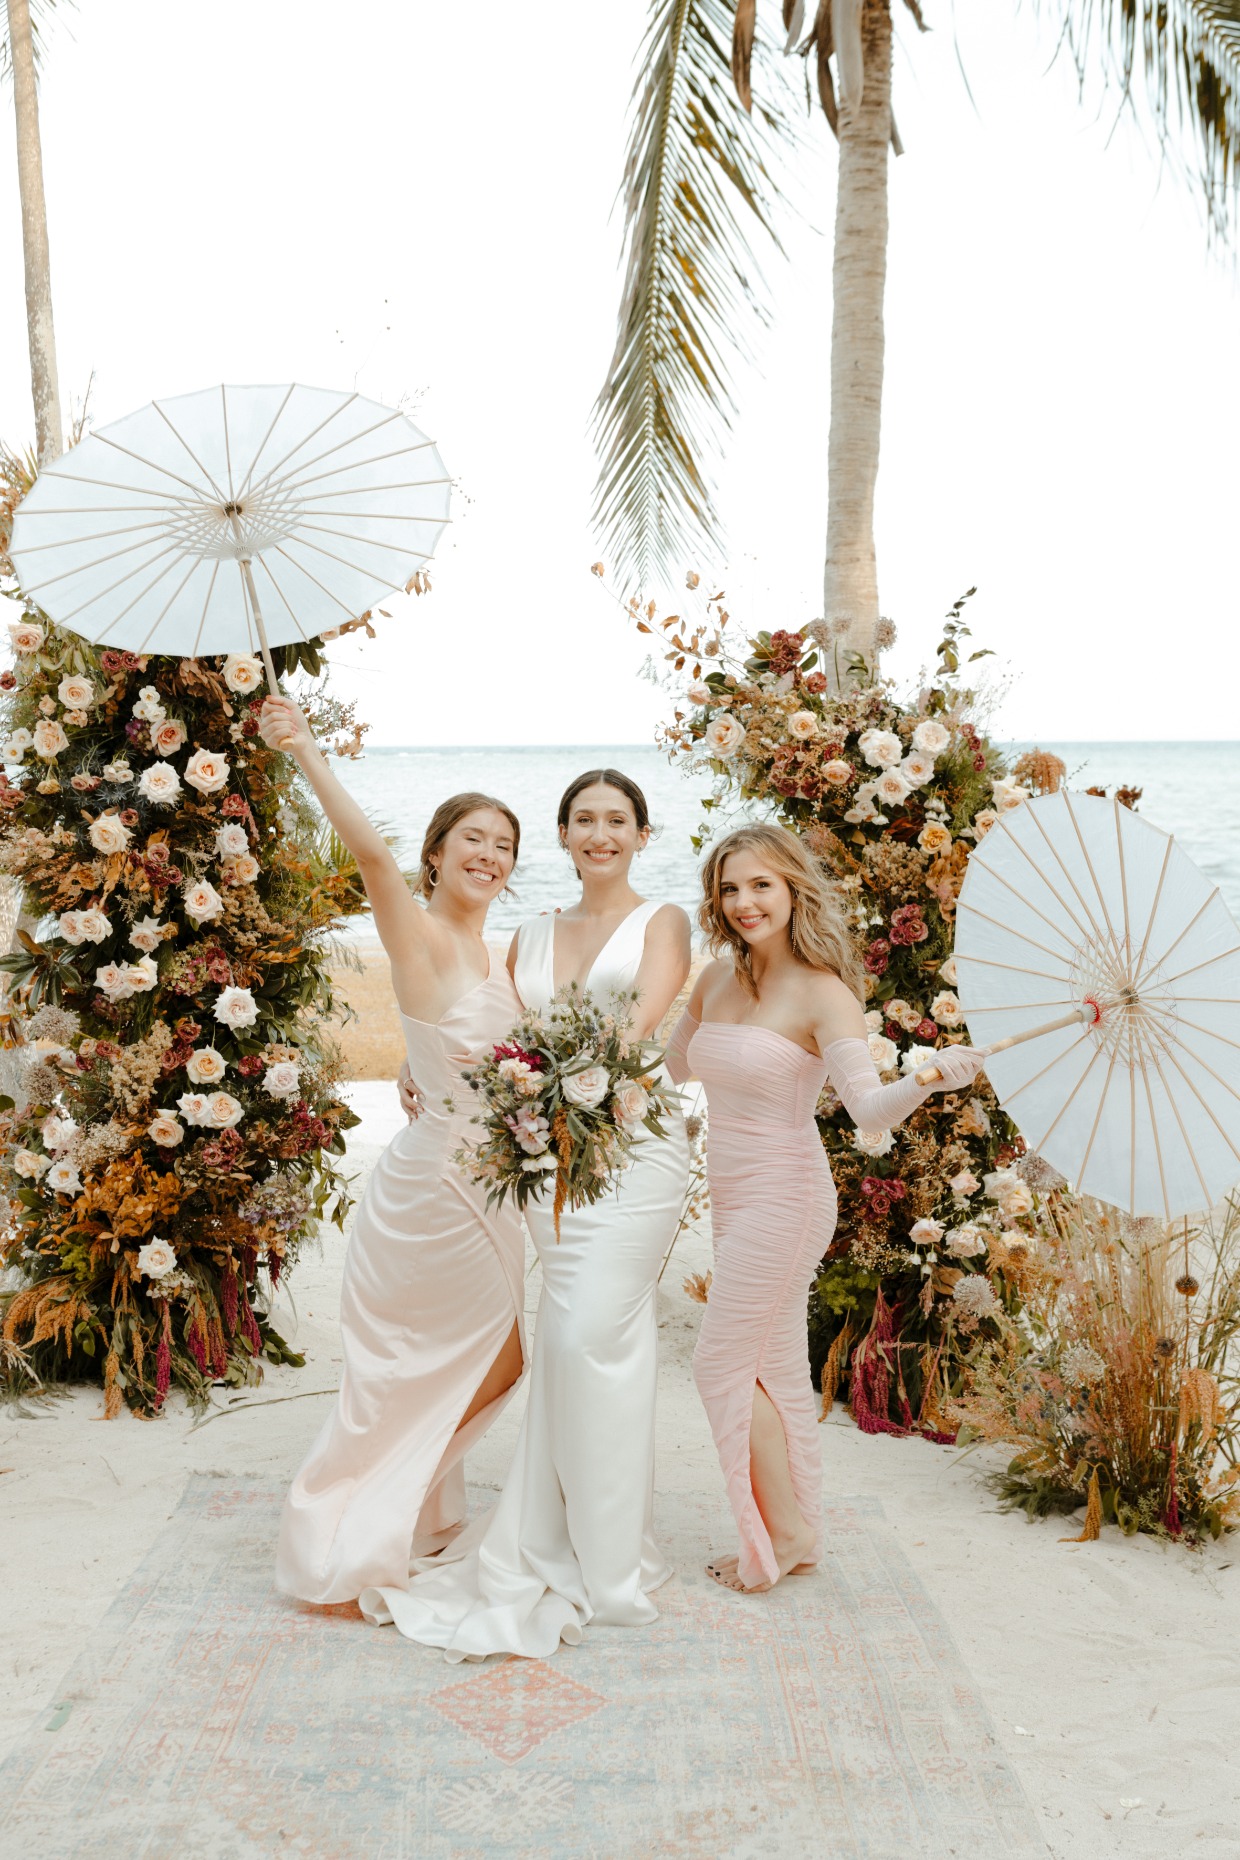 S.O.S. Planners beach wedding with blush florals, bridesmaids, and parasols